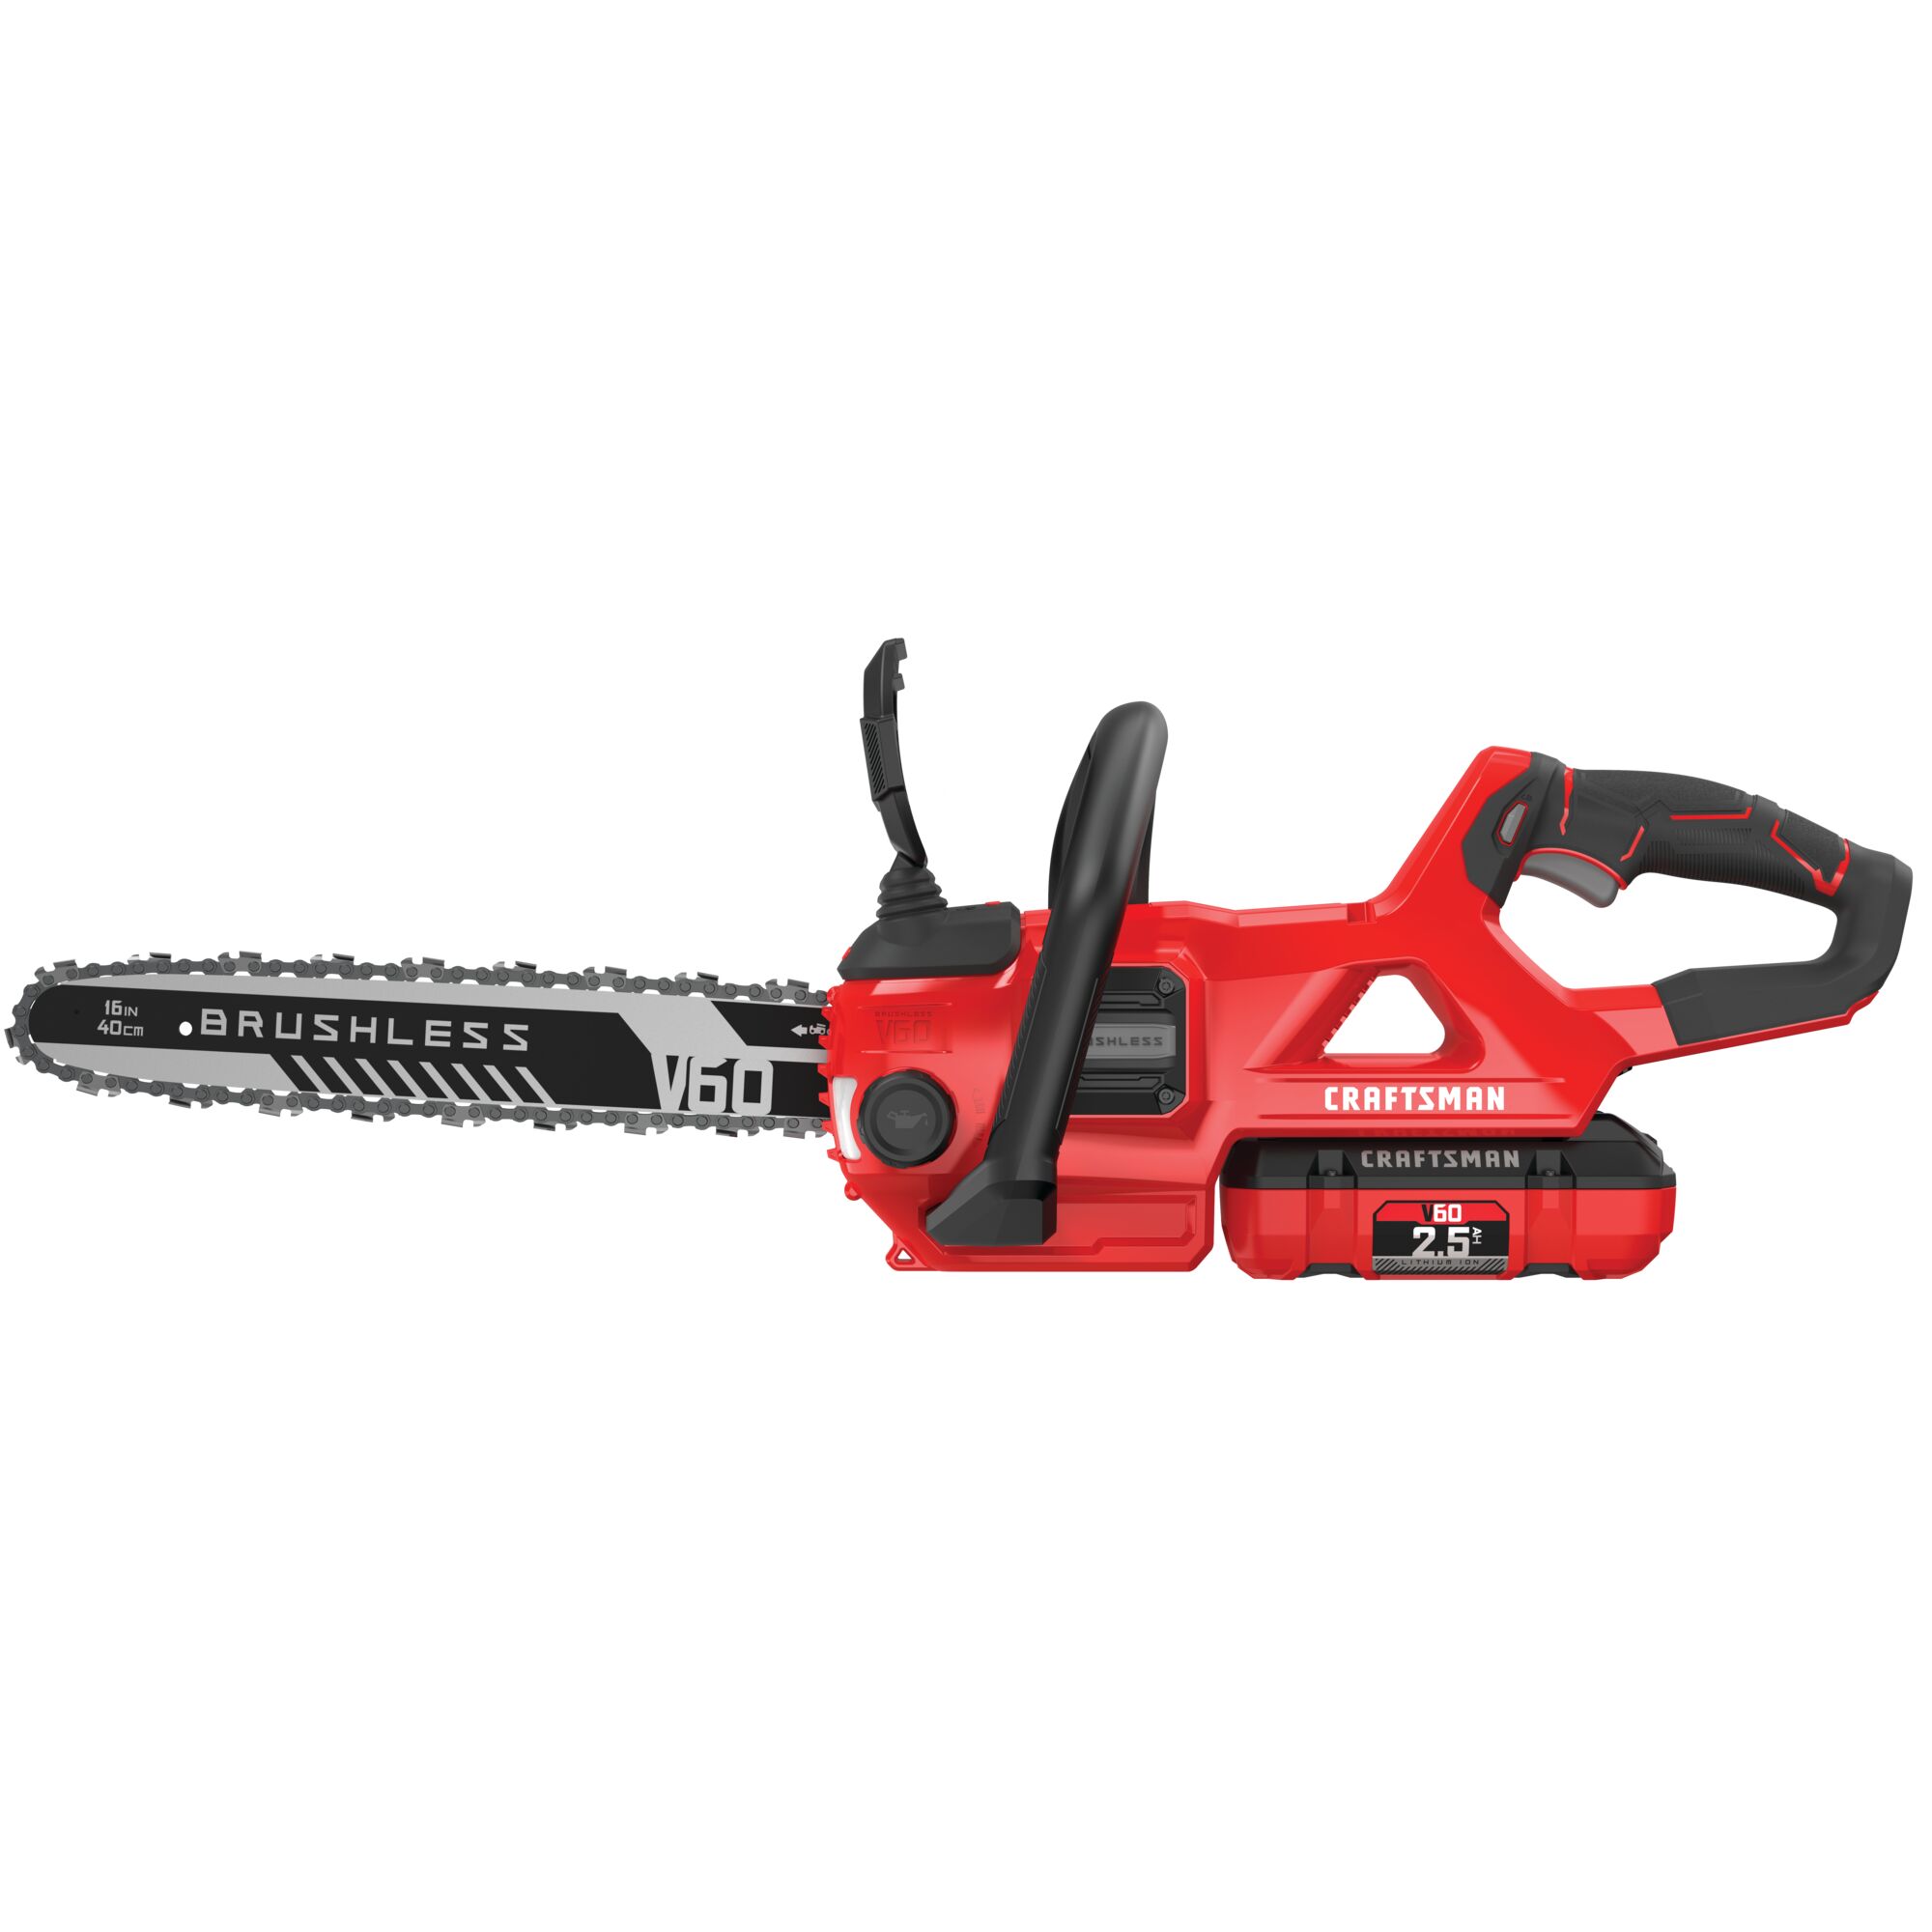 Right profile of volt 60 cordless 16 inch brushless chainsaw kit 2.5 Amp hour.